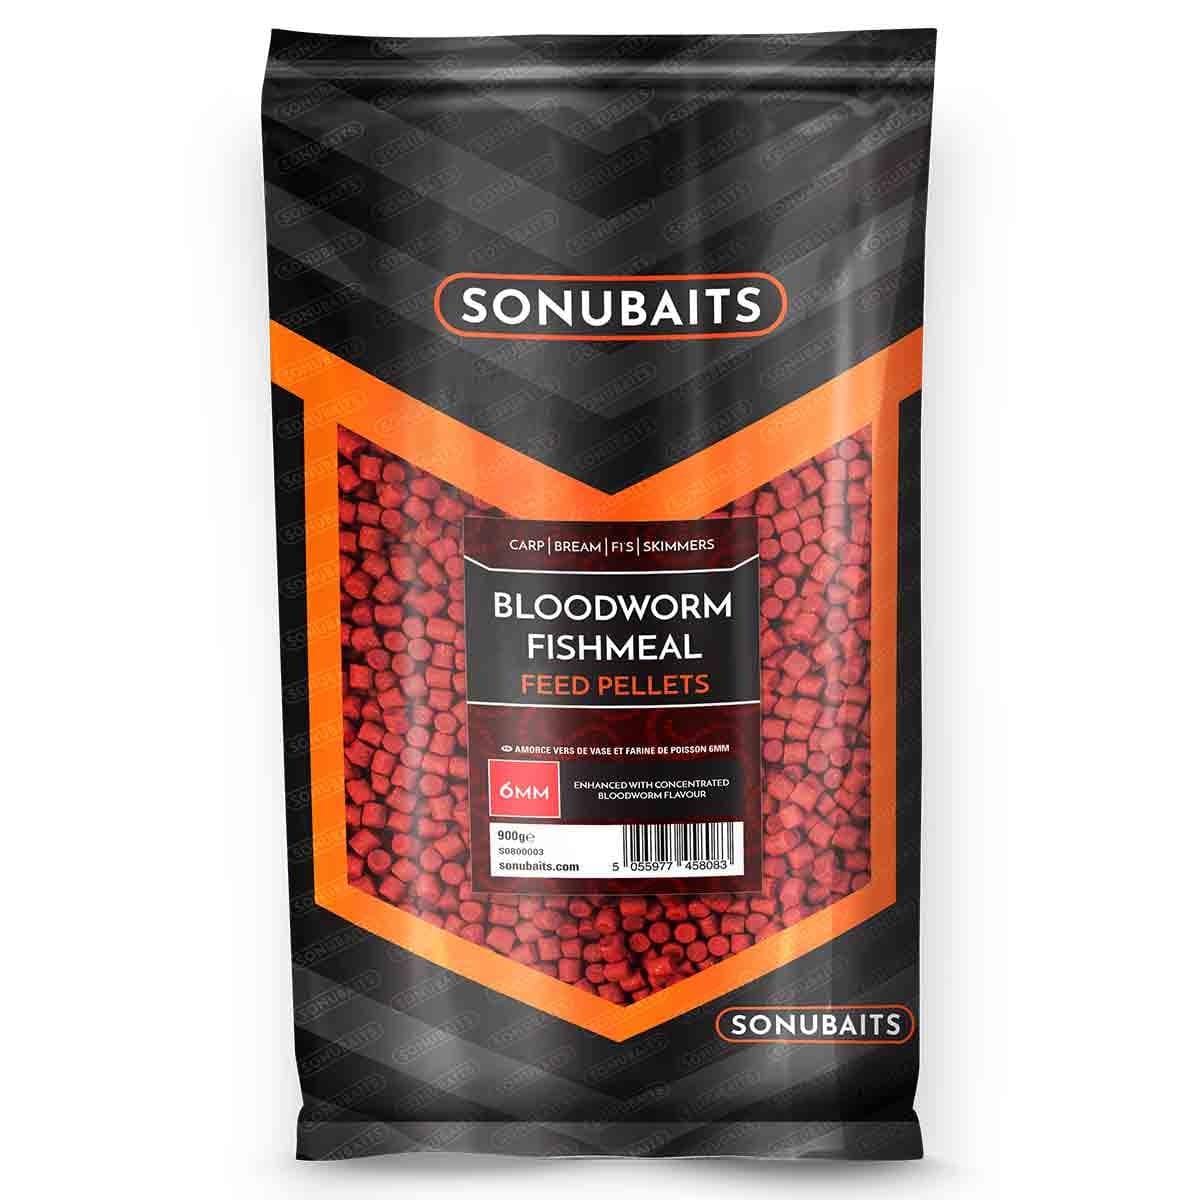 Sonubaits Bloodworm Fishmeal Feed 4mm or 6mm.